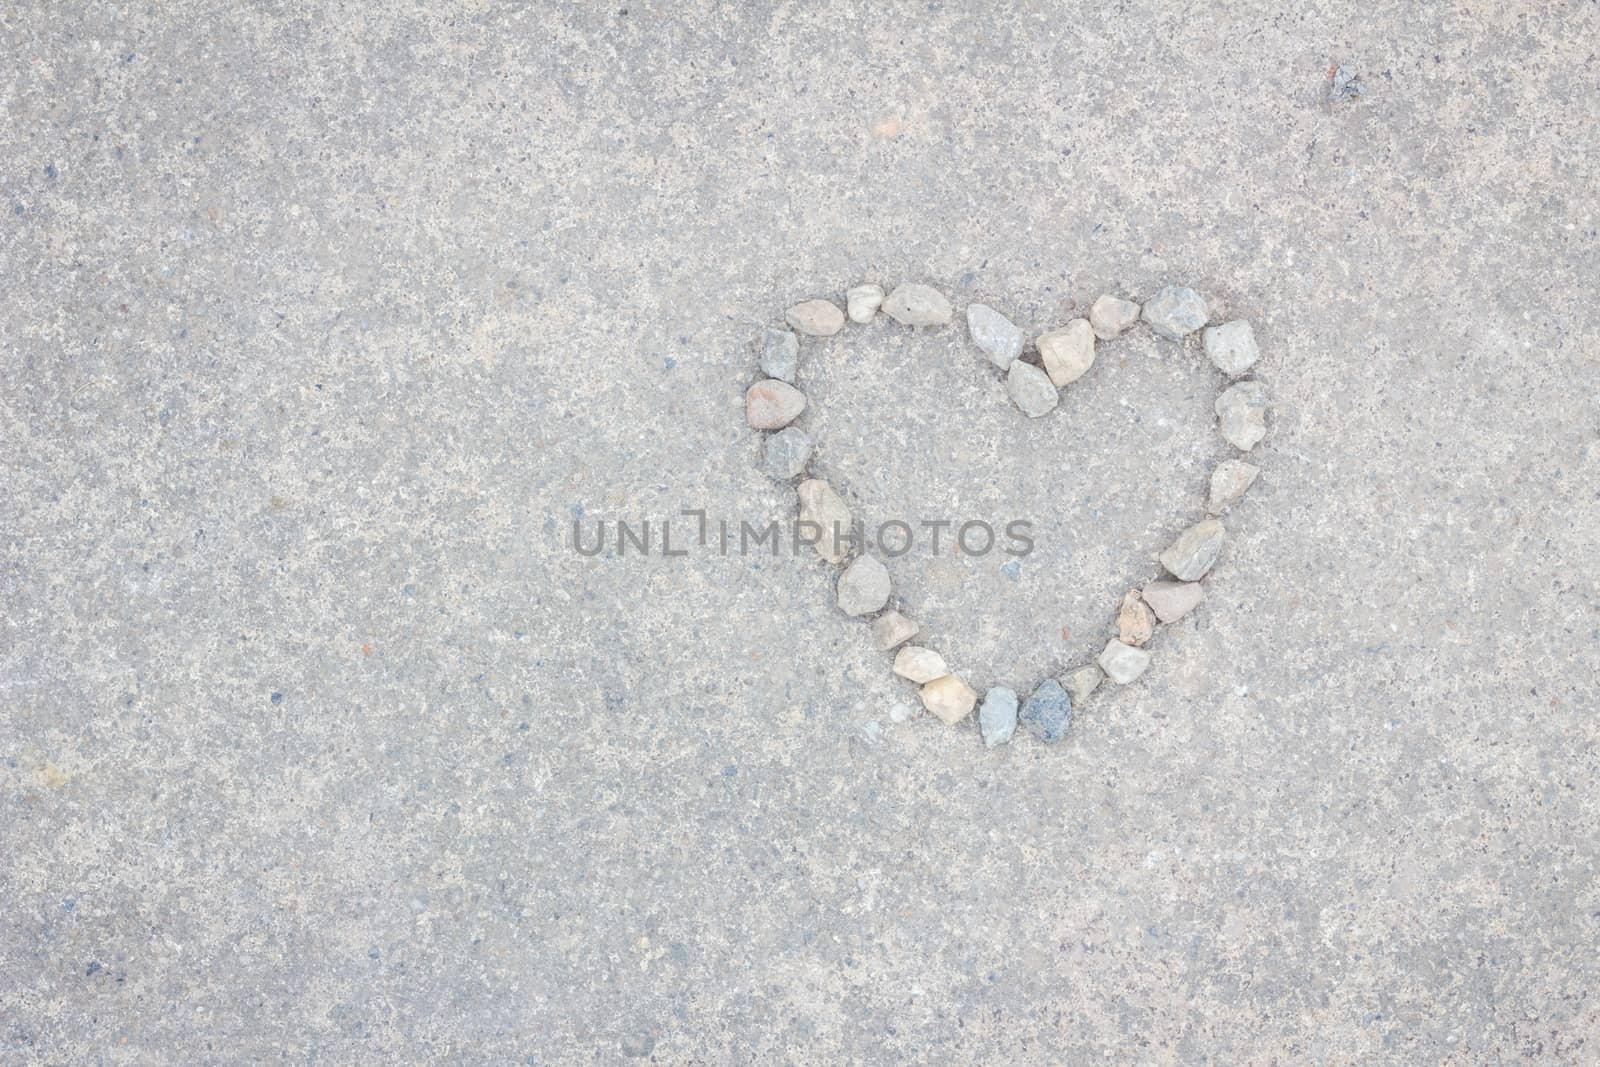 Heart made of stones on concrete background, with copyspace